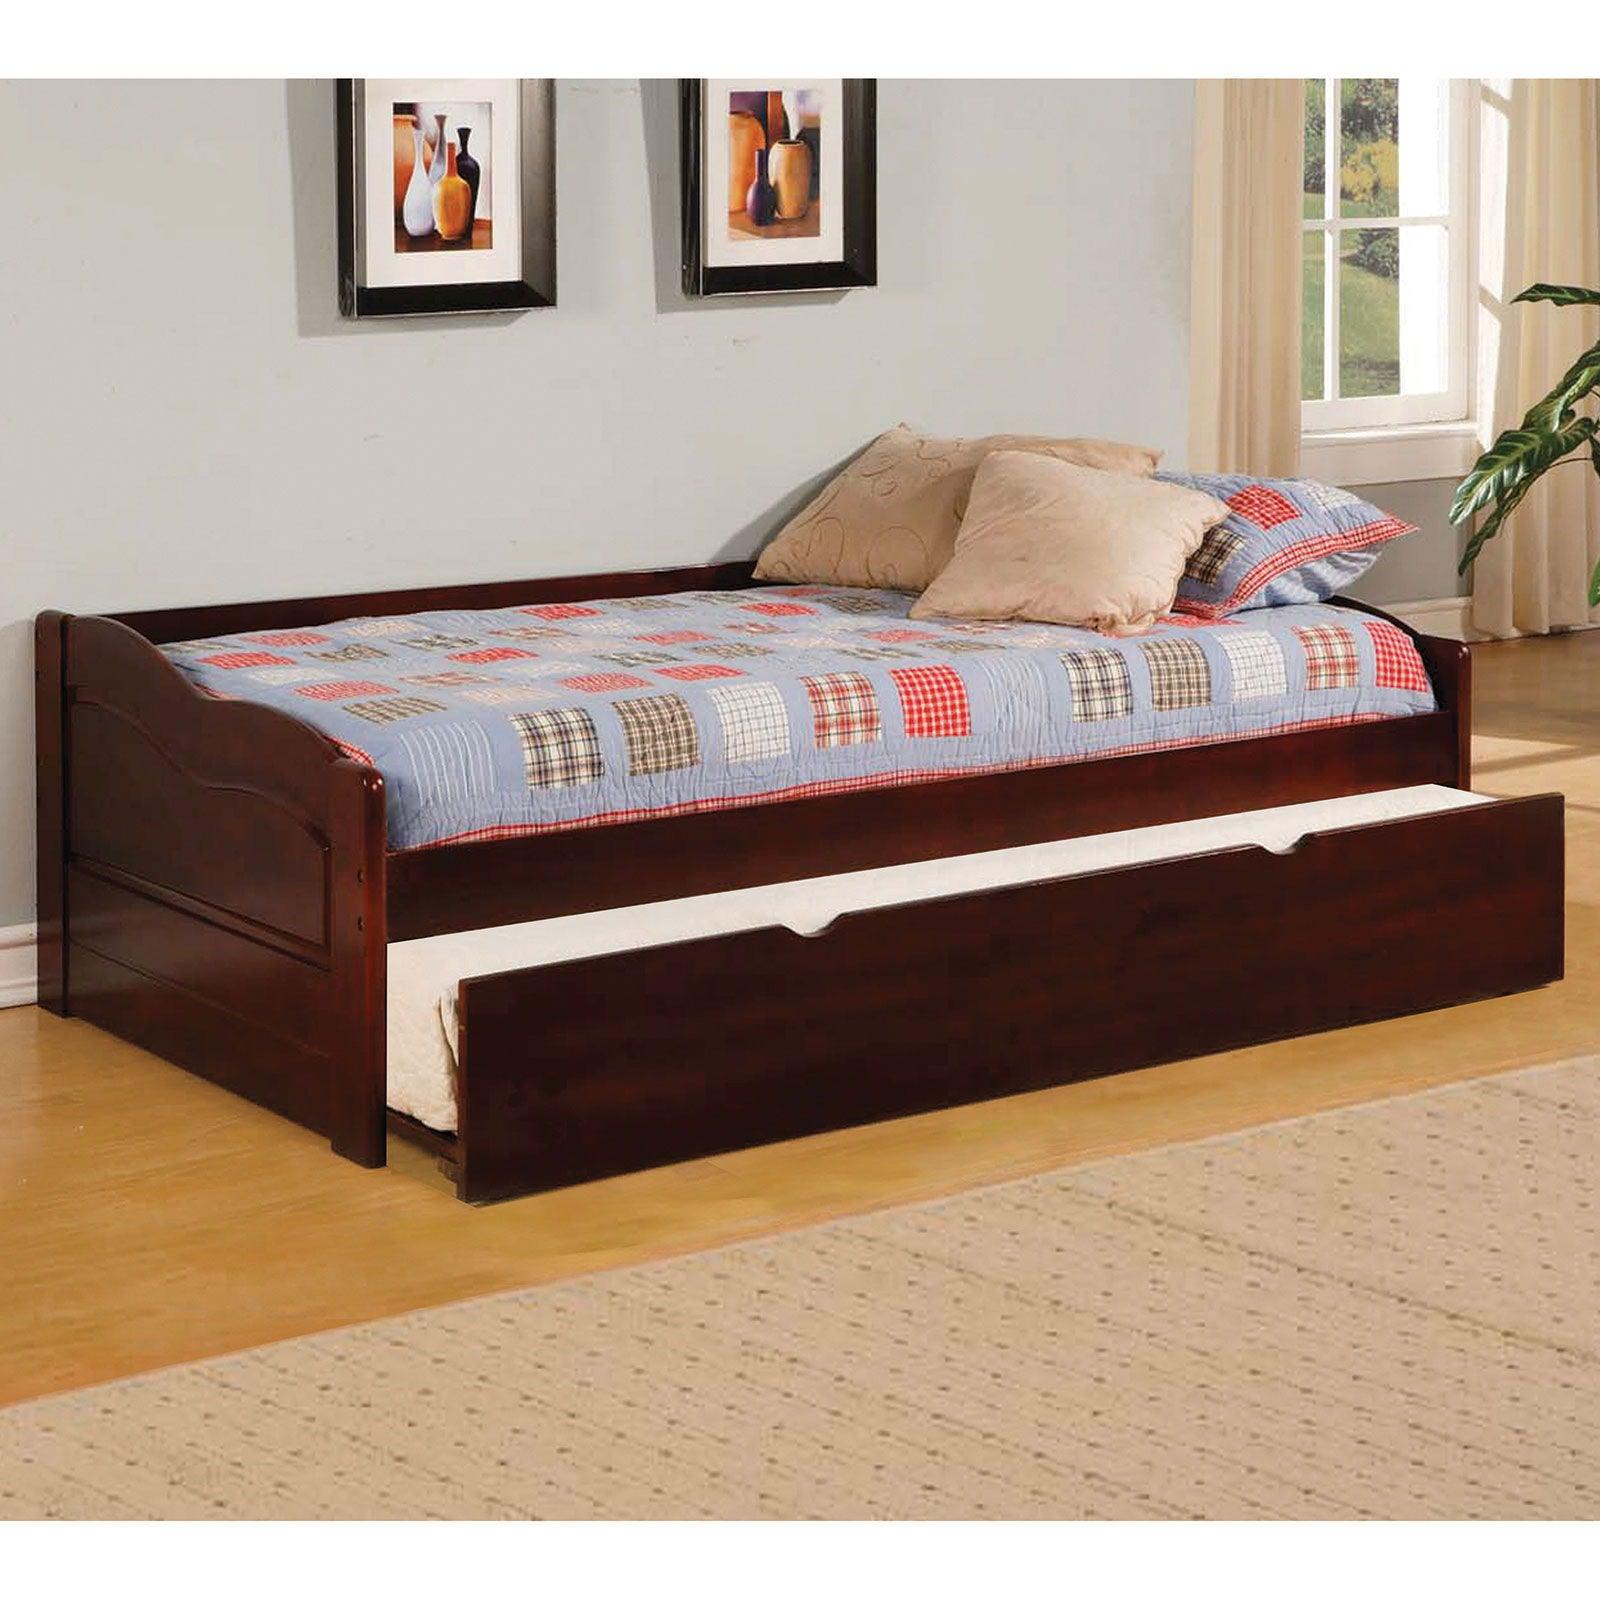 Furniture of America - Sunset - Daybed With Trundle - Cherry - 5th Avenue Furniture